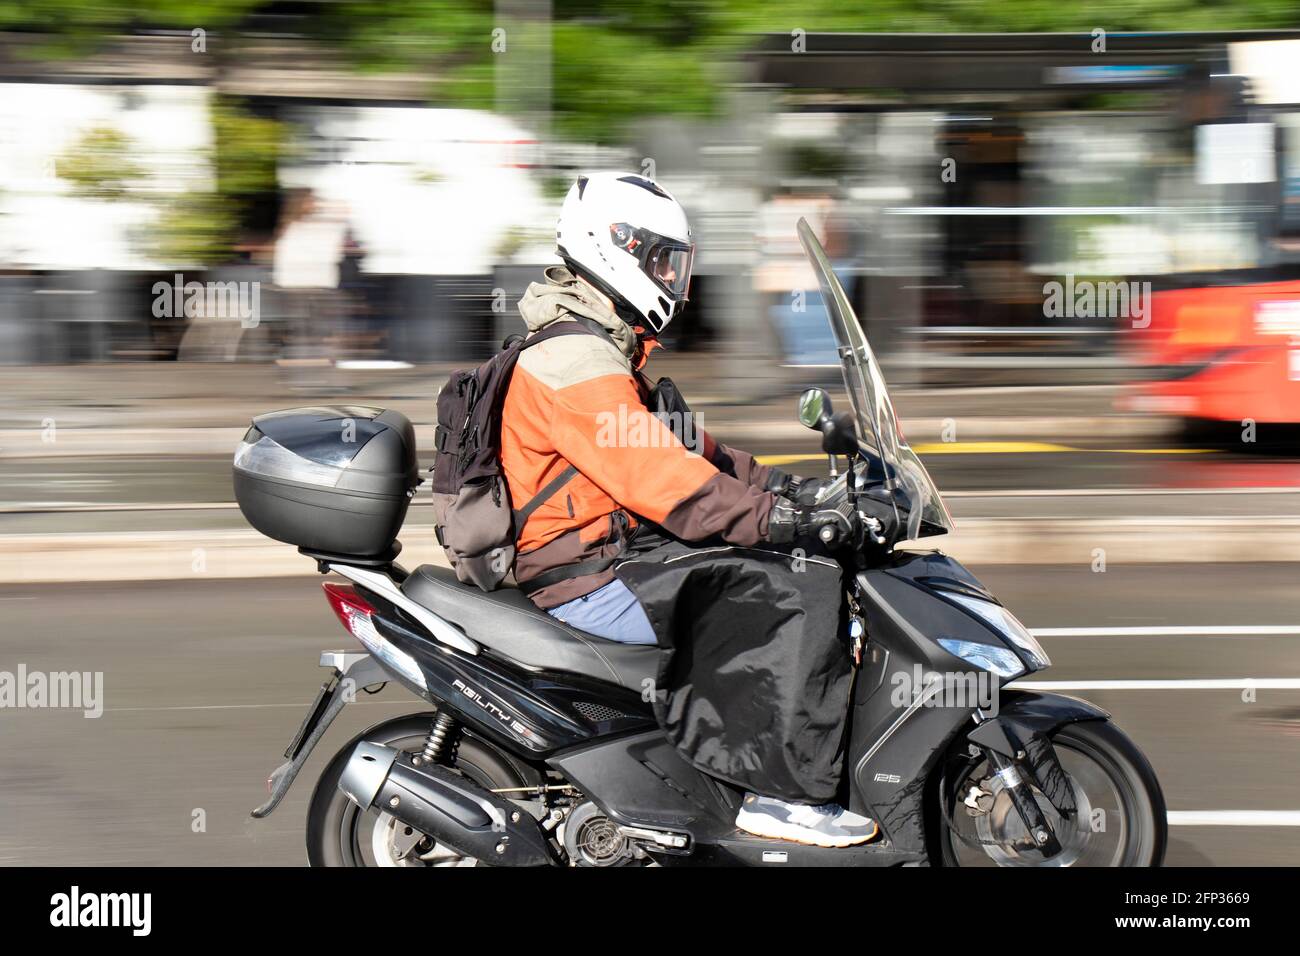 Belgrade, Serbia - May 13, 2021: One man riding a scooter on city street on a sunny day after the rain Stock Photo